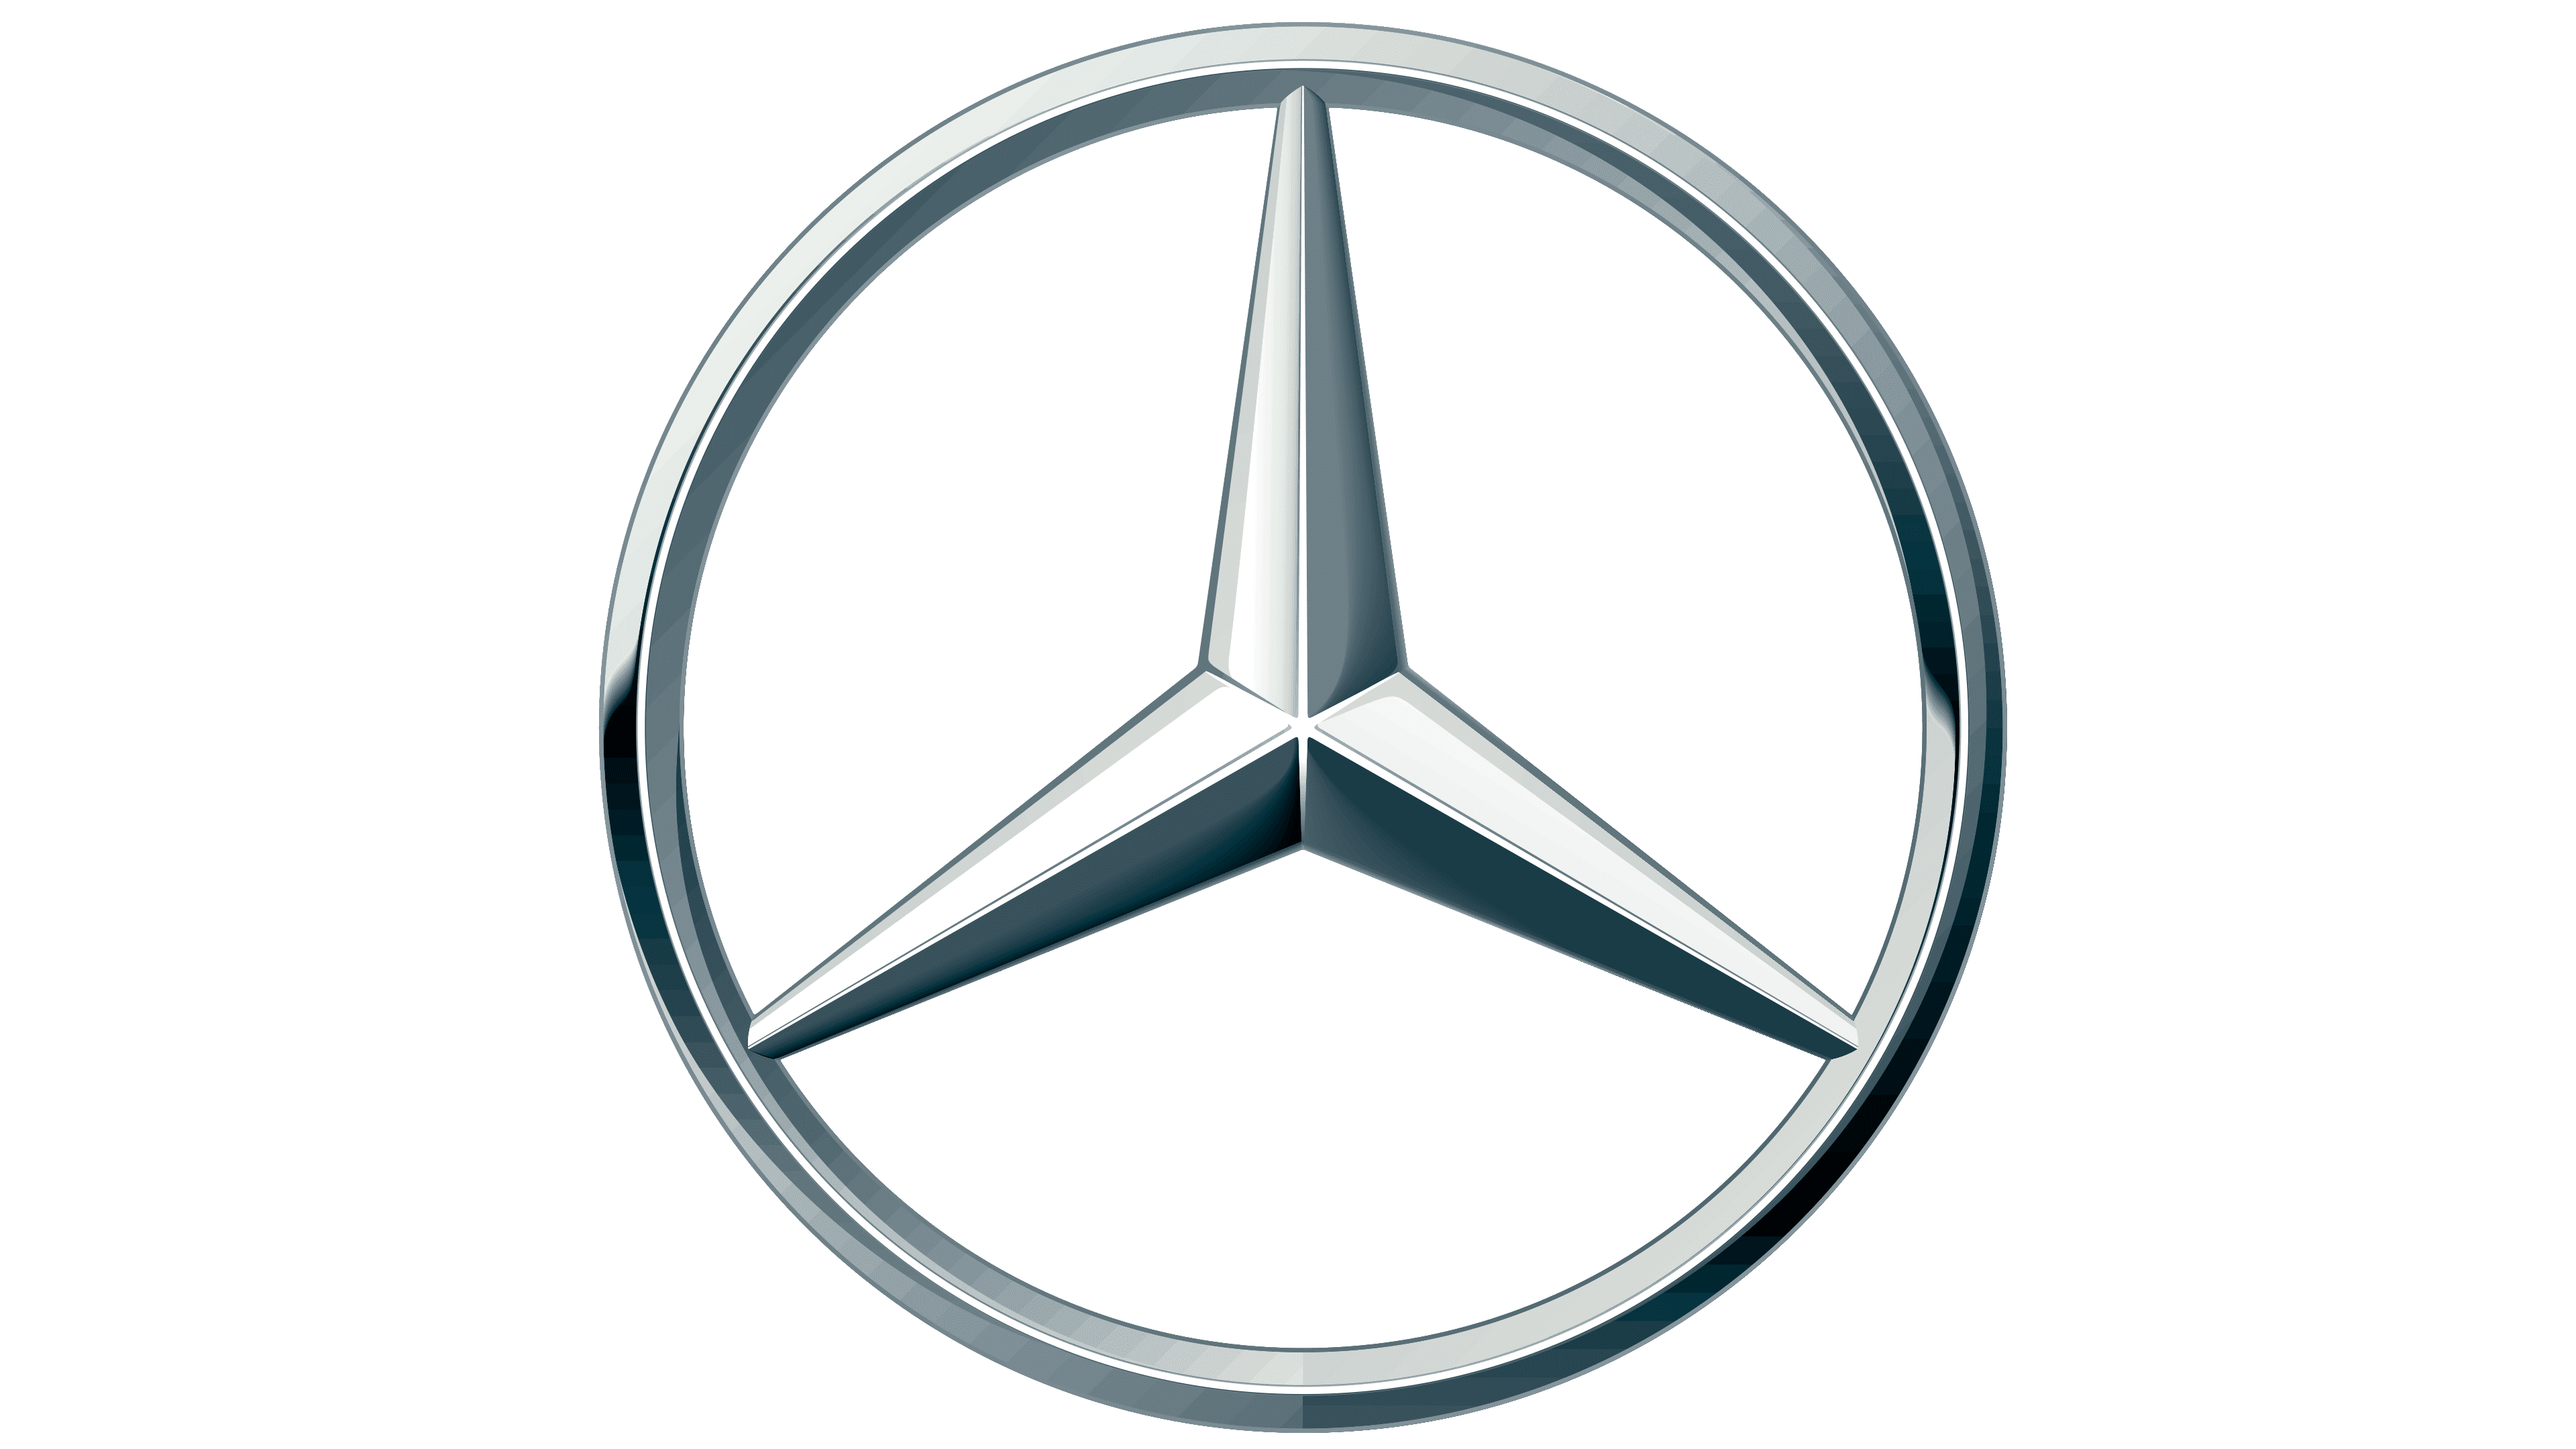 Mercedes Benz Logo, symbol, meaning, history, PNG, brand